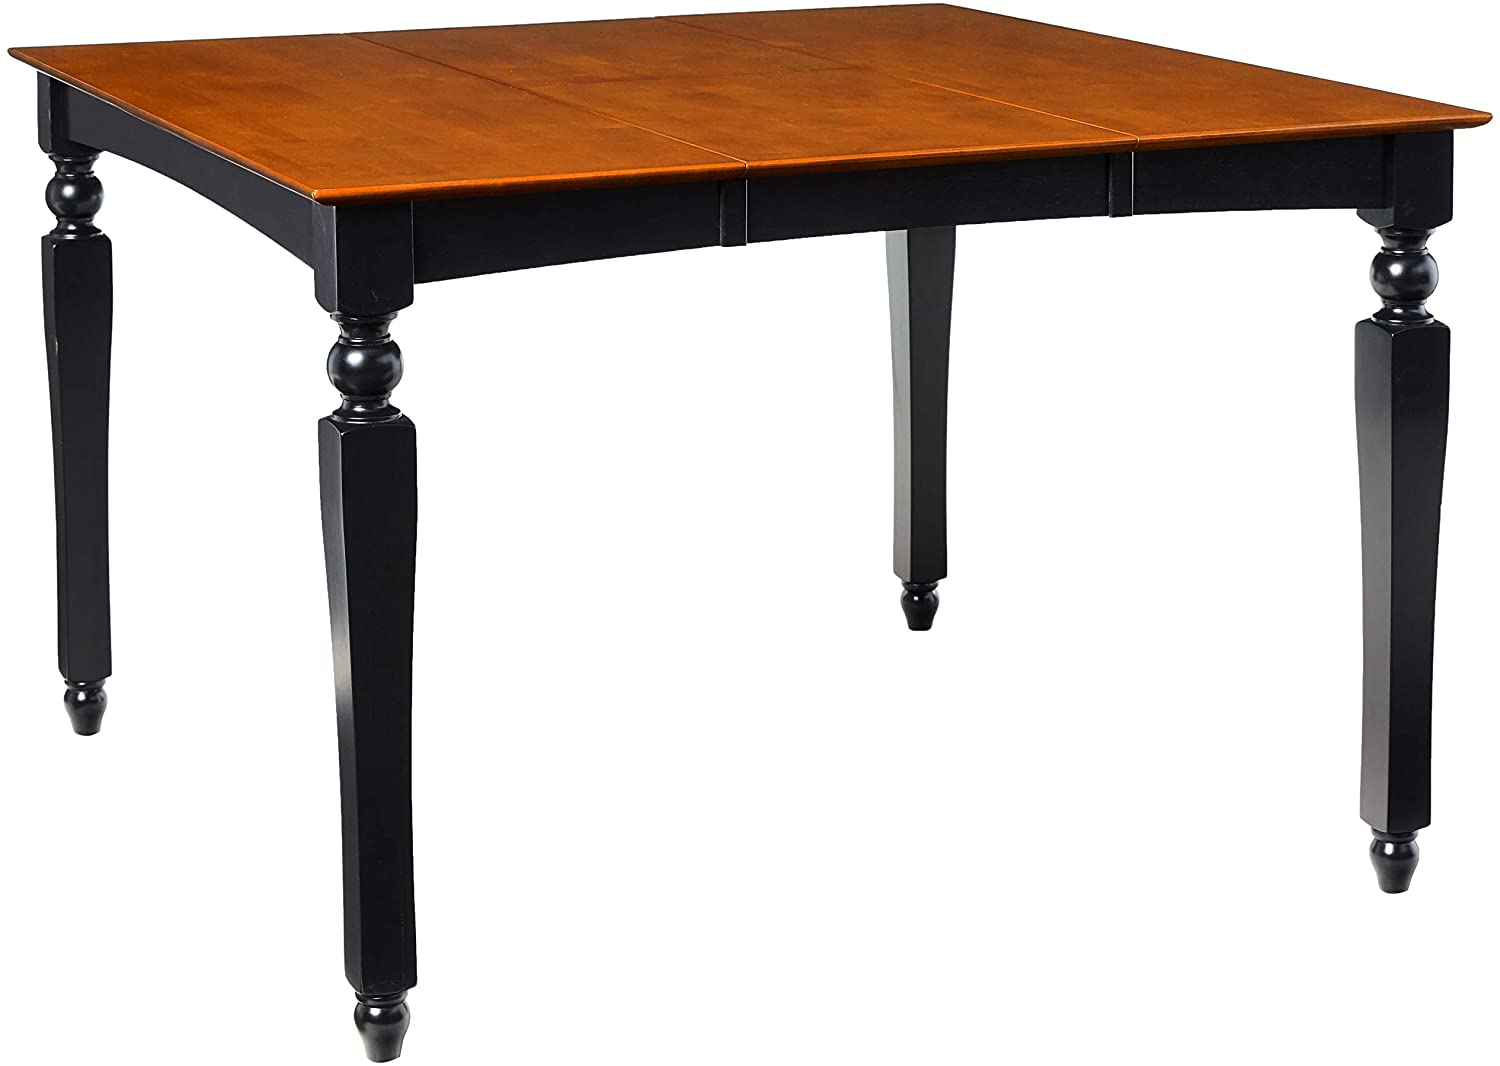 B00TV47PCC Chelsea Gathering 54" square counter height dining table with 18" butterfly leaf in Black Finish